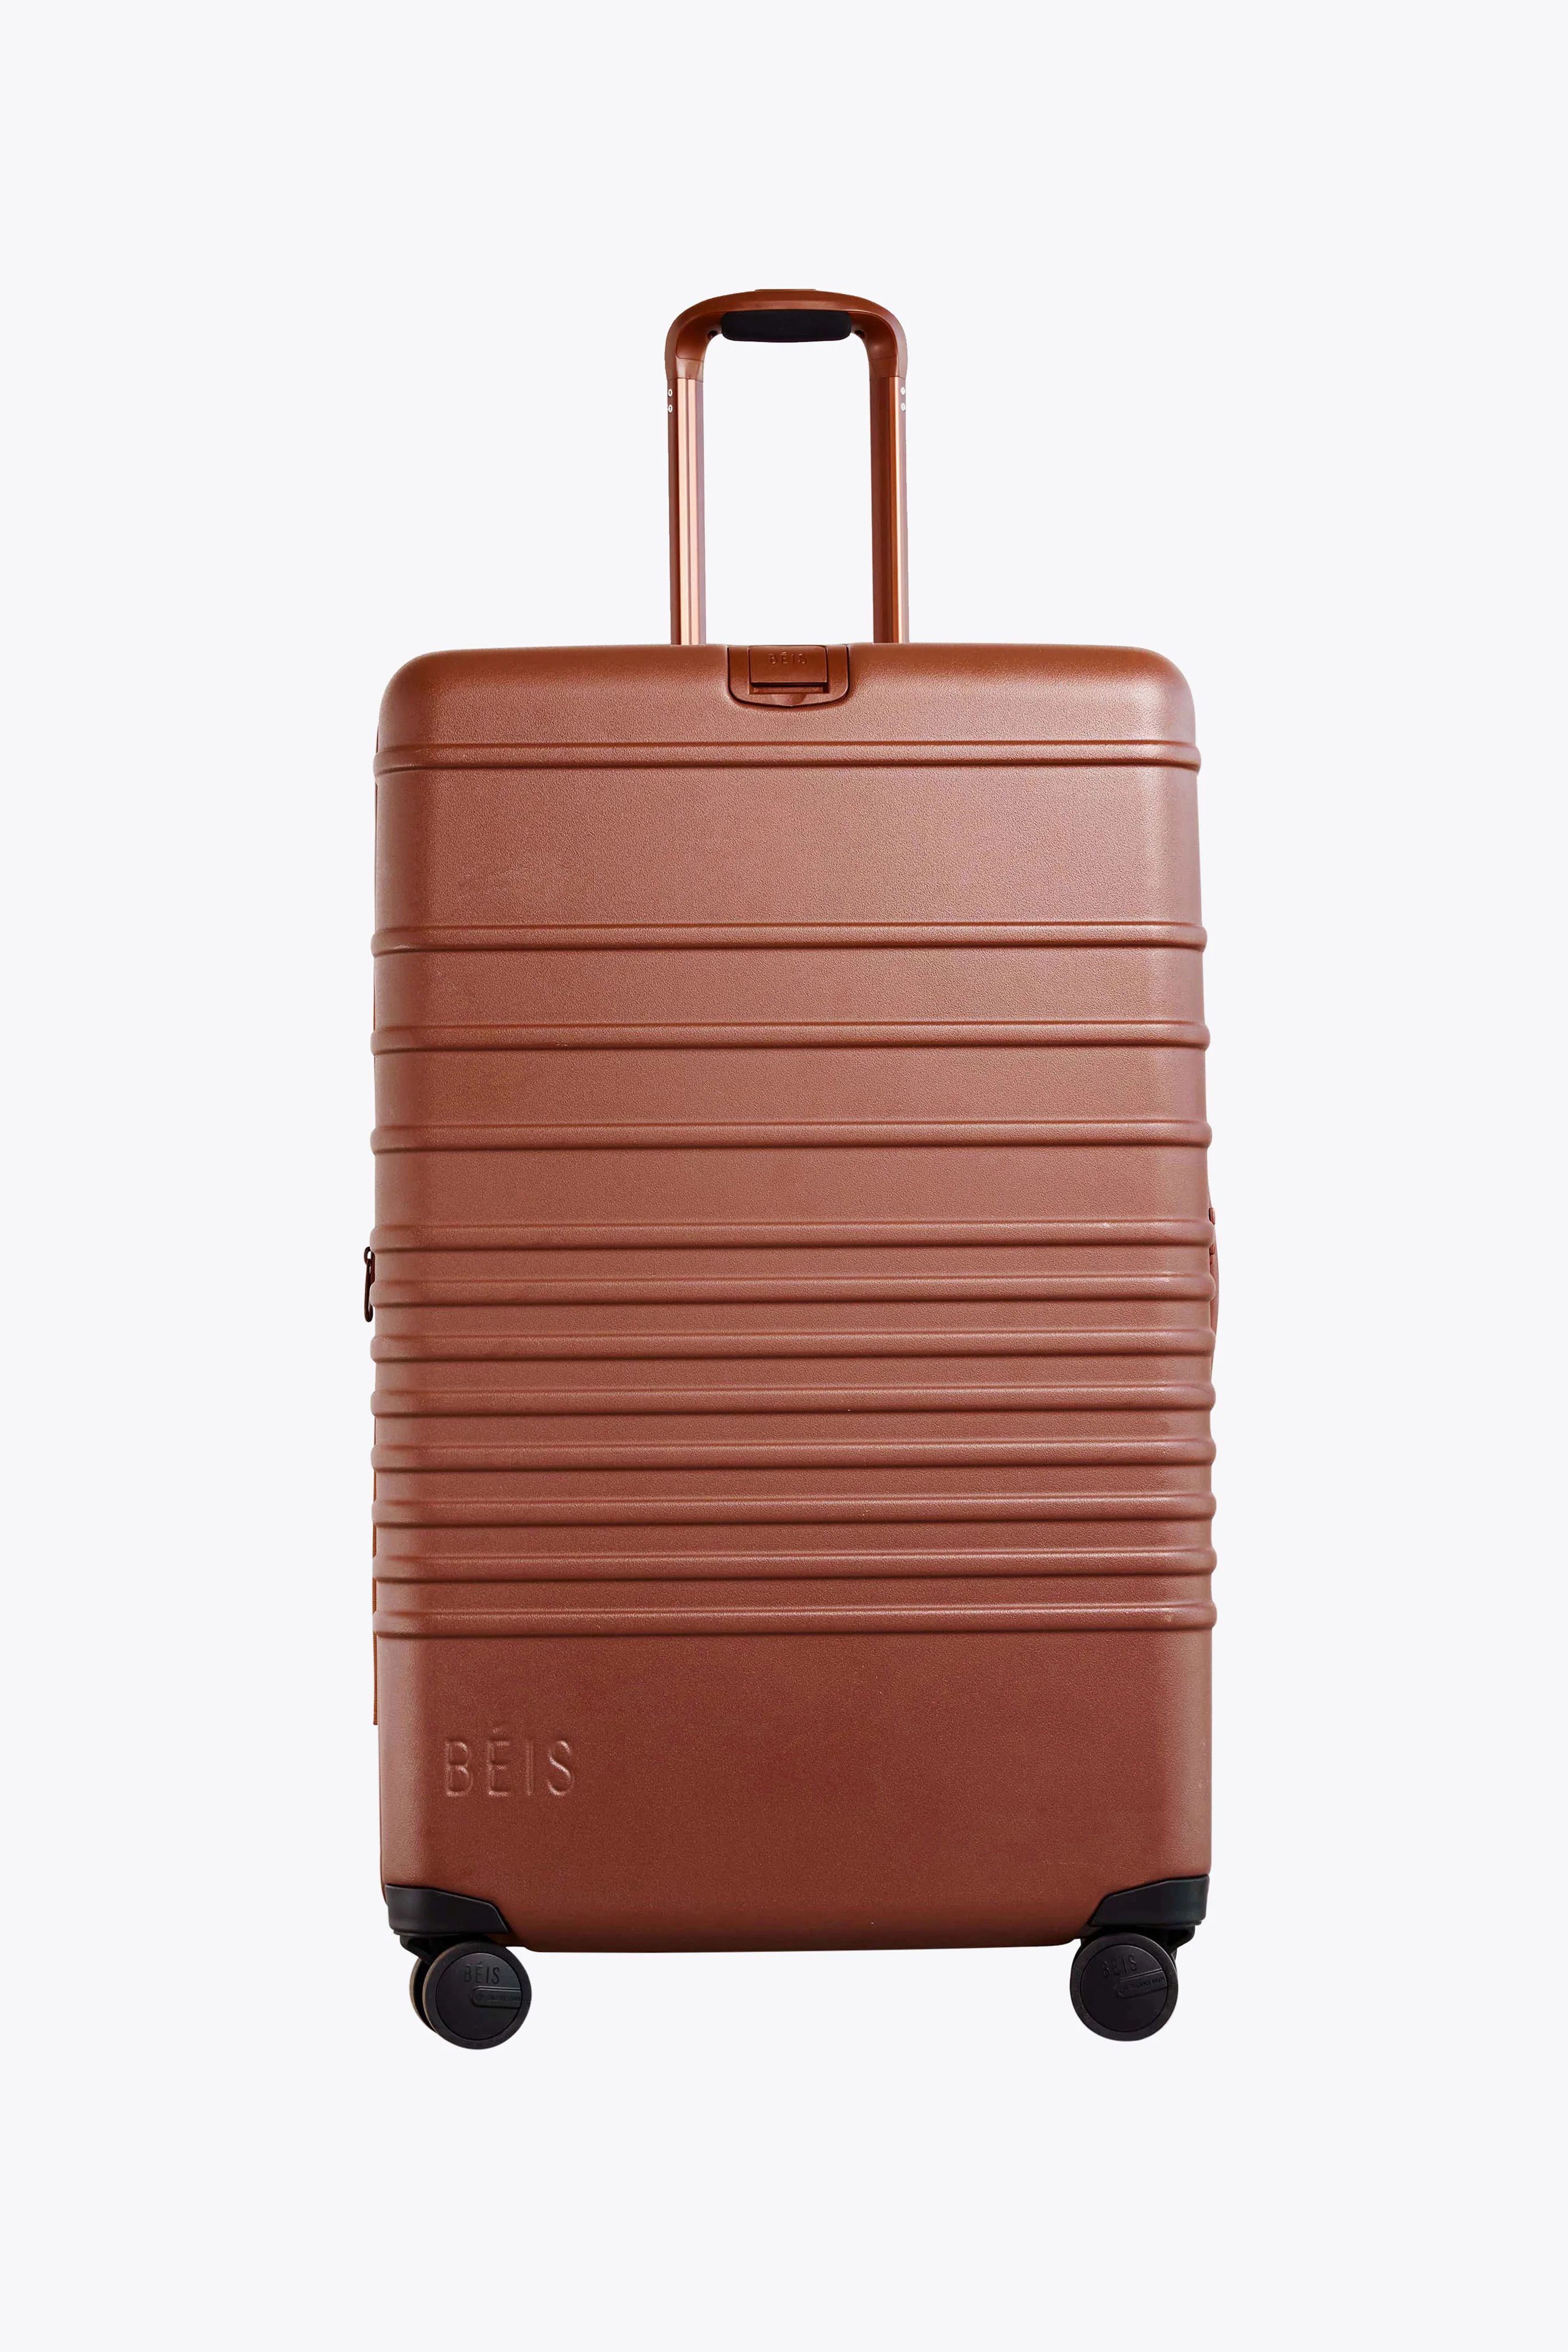 BÉIS 'The Large Check-In Roller' in Maple - 29 In Suitcase & Brown Luggage | BÉIS Travel